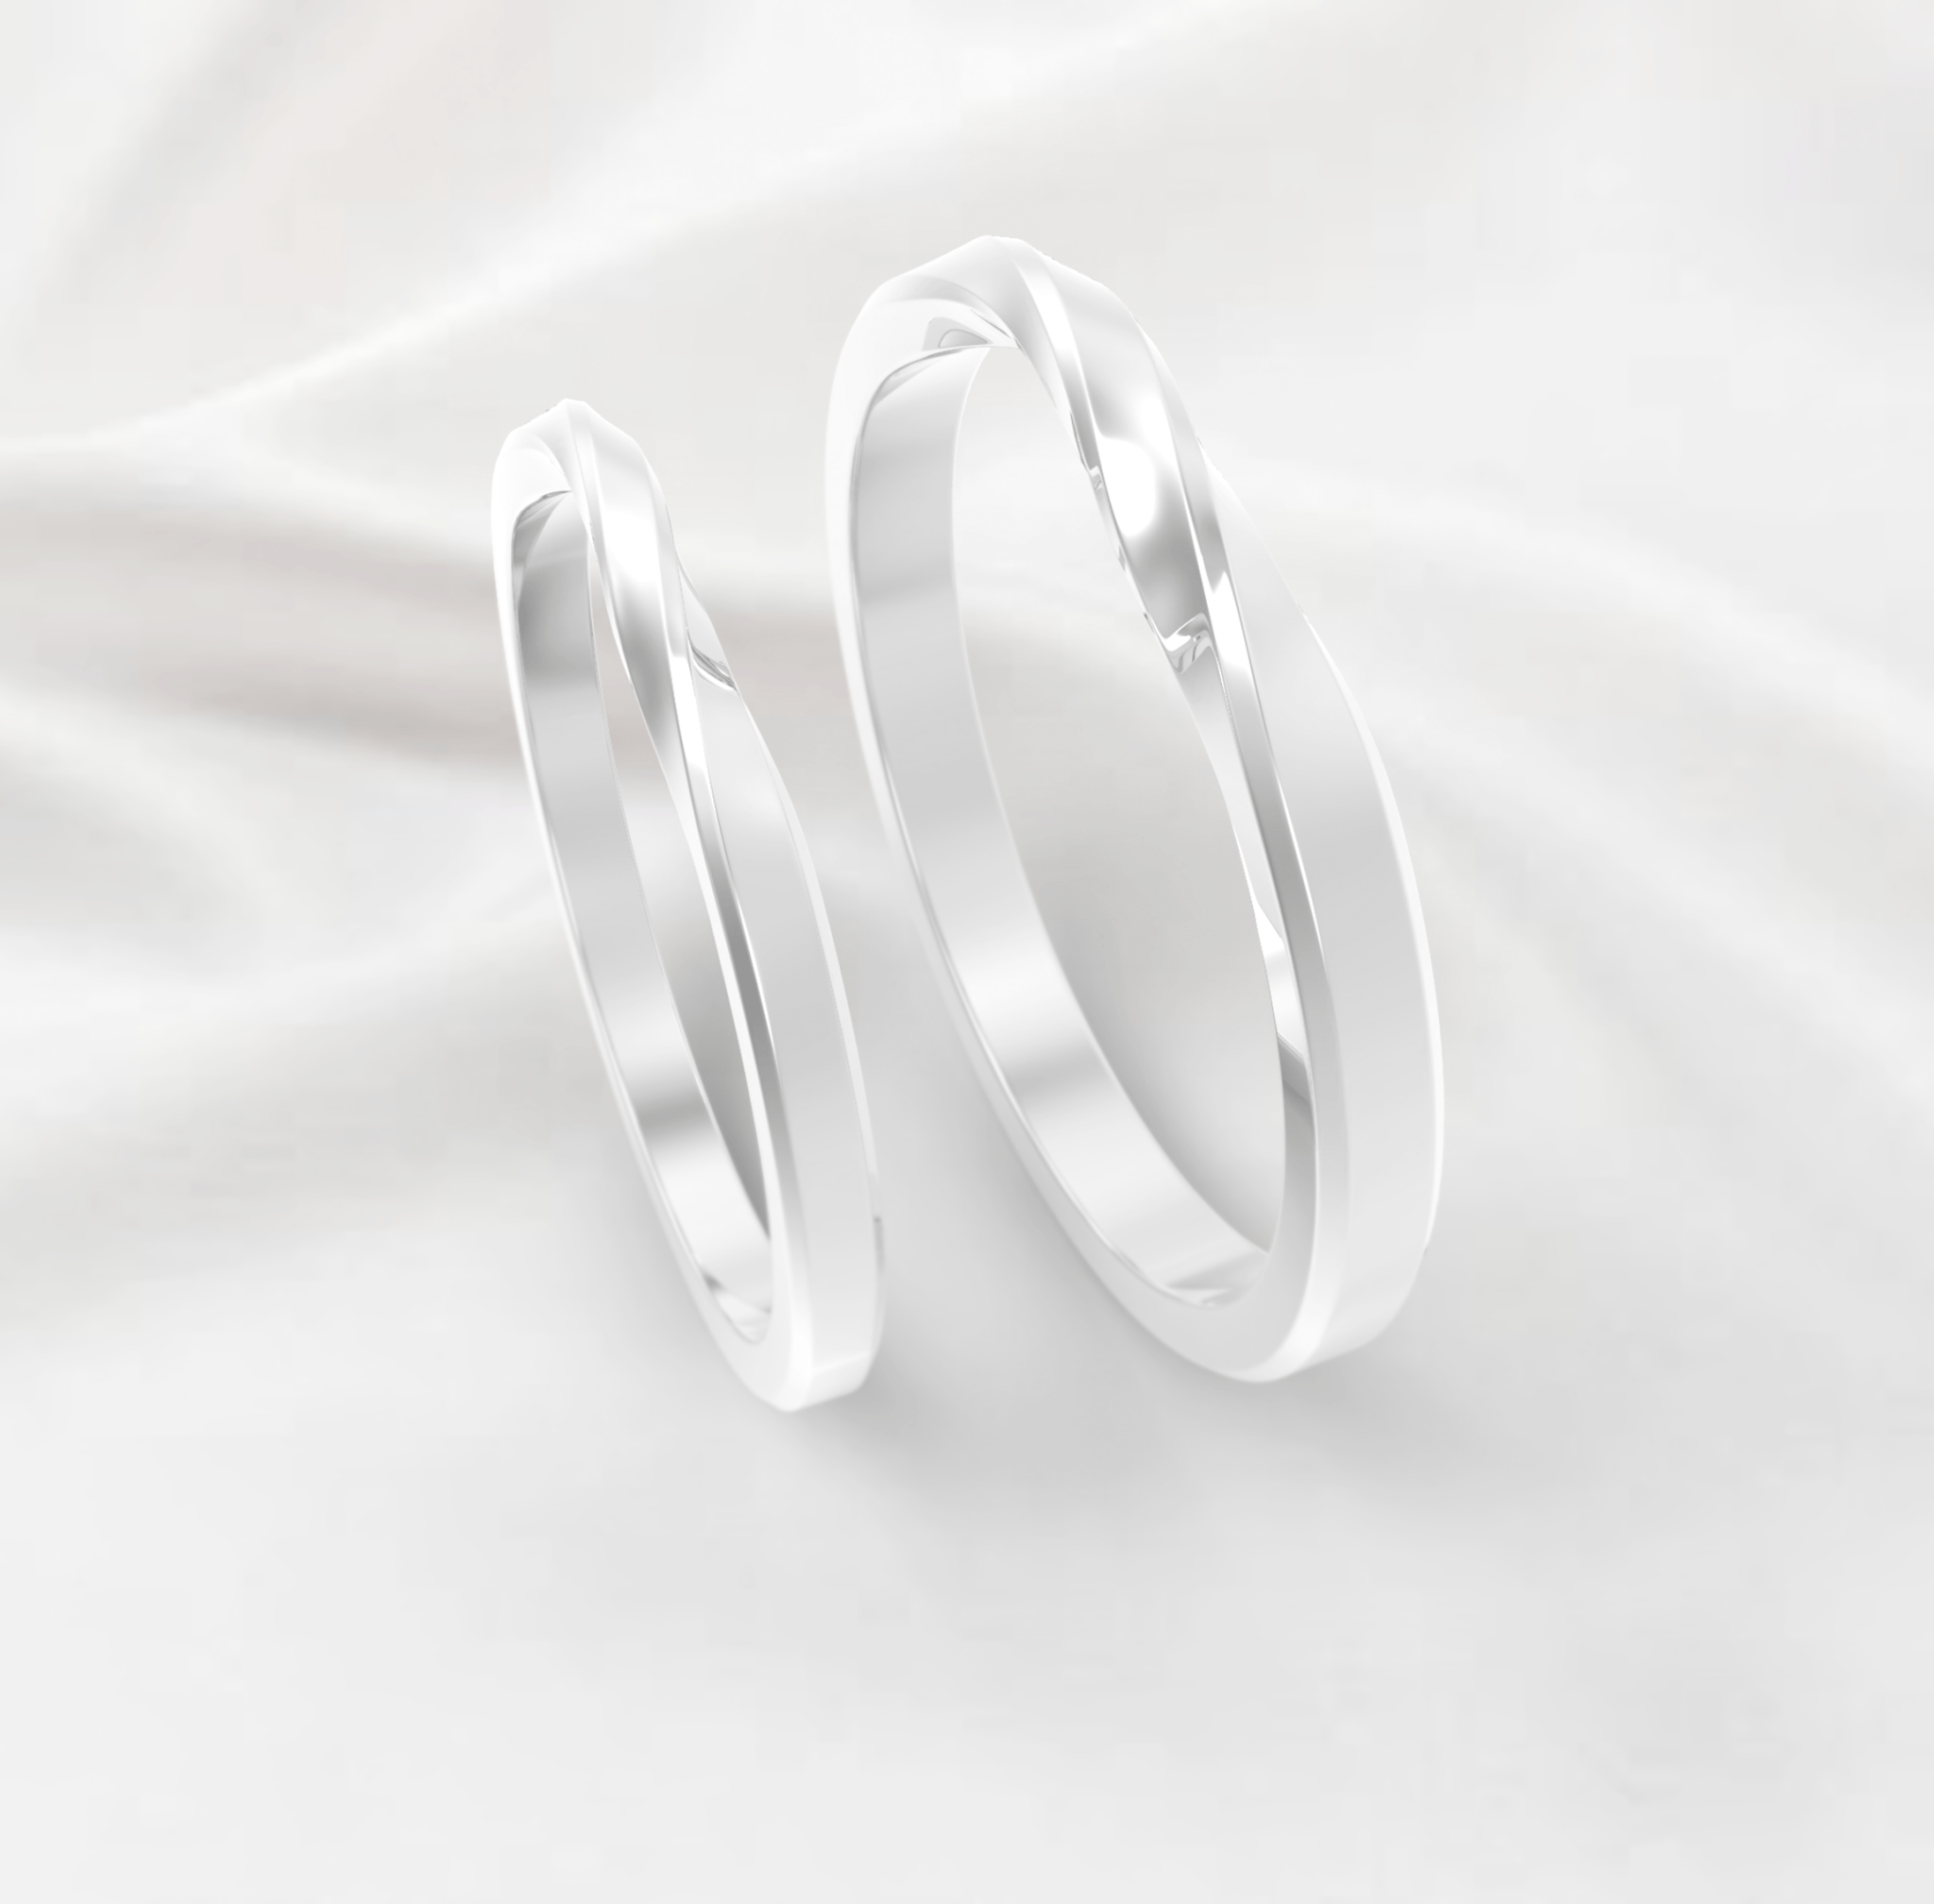 Unique Twisted Wedding Ring Set No.58 in White Gold - Roelavi